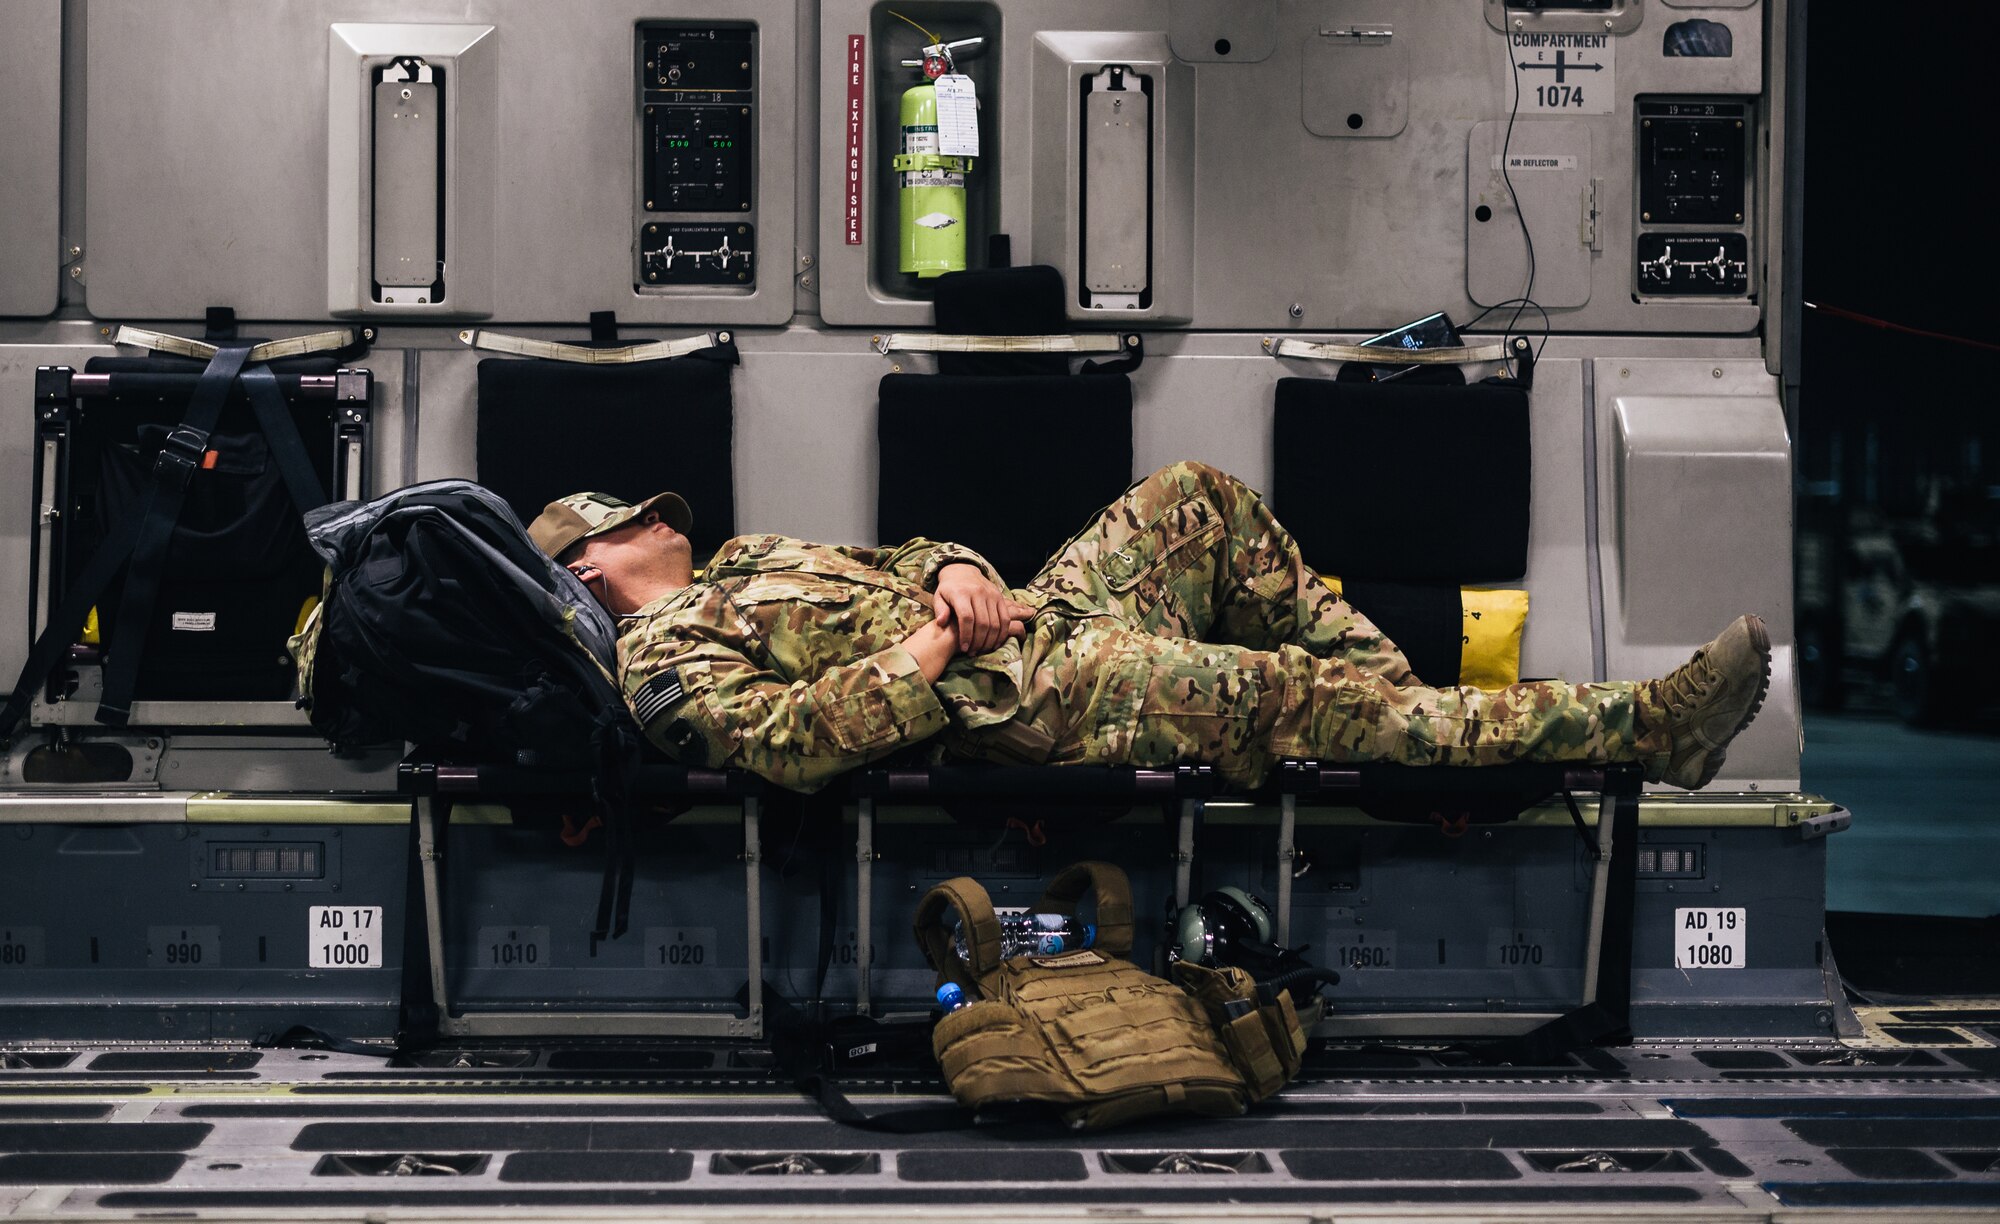 A U.S. Air Force Airman sleeps inside a C-17 Globemaster III during a flight over an undisclosed location in support of Operation Freedom Sentinel, Jan. 22, 2018. Airmen supporting OFS work to prevent Afghanistan from becoming a safe haven for al Qaeda and international extremist groups. (U.S. Air Force illustration)